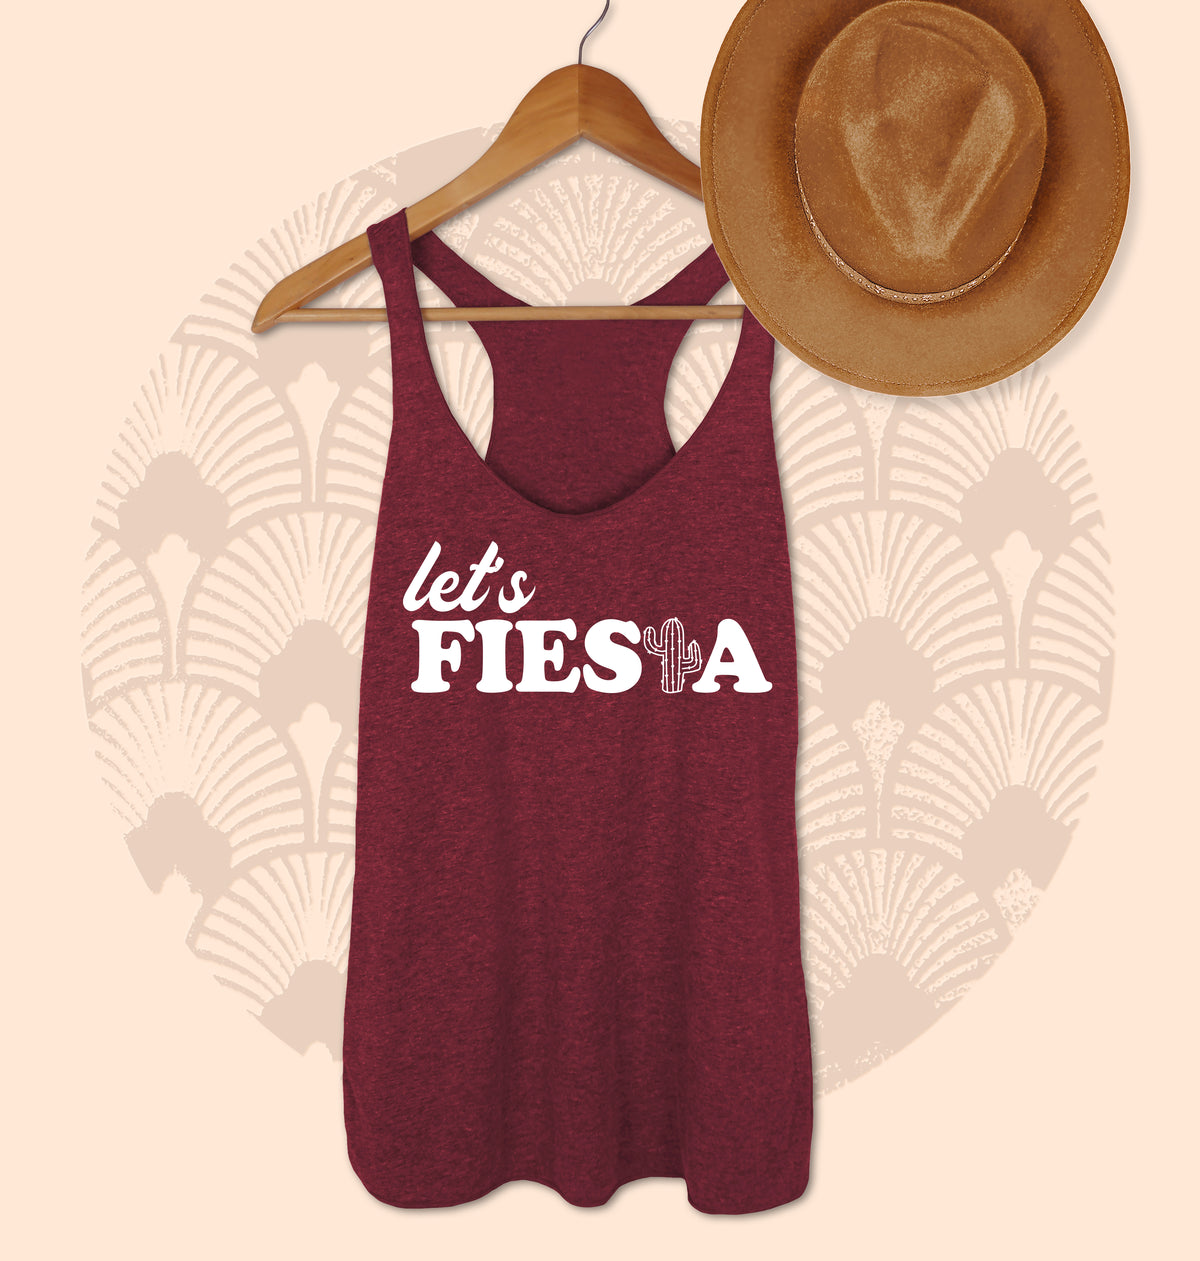 Maroon tank with a cactus that says let's fiesta - HighCiti